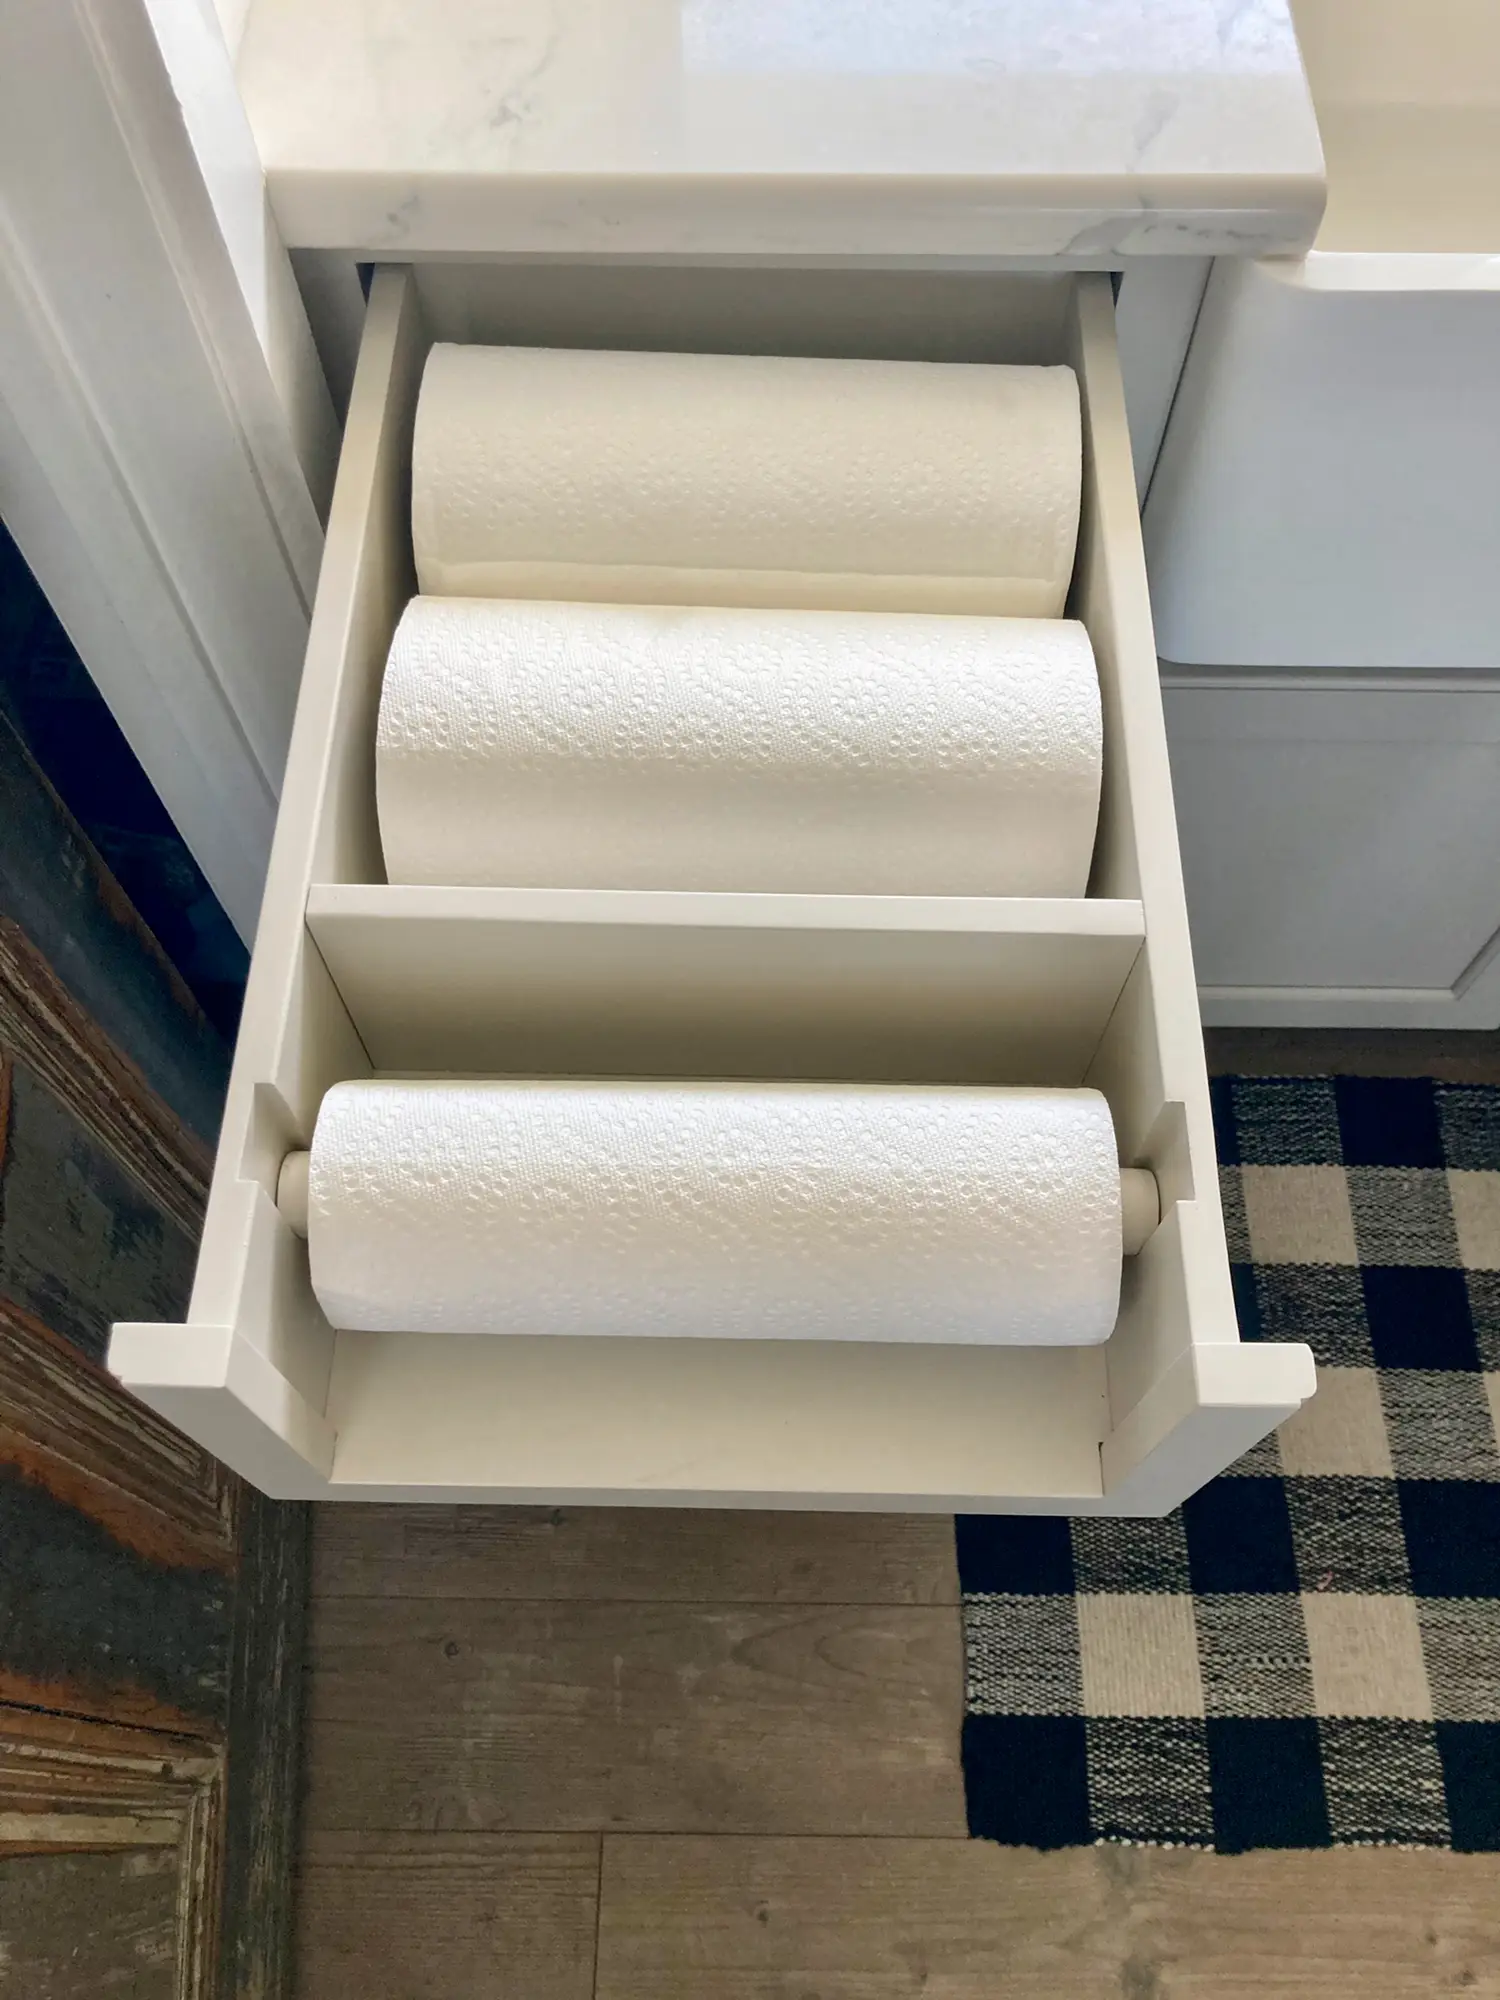 From Kitchen Drawer To Hidden Paper Towel Holder - Addicted 2